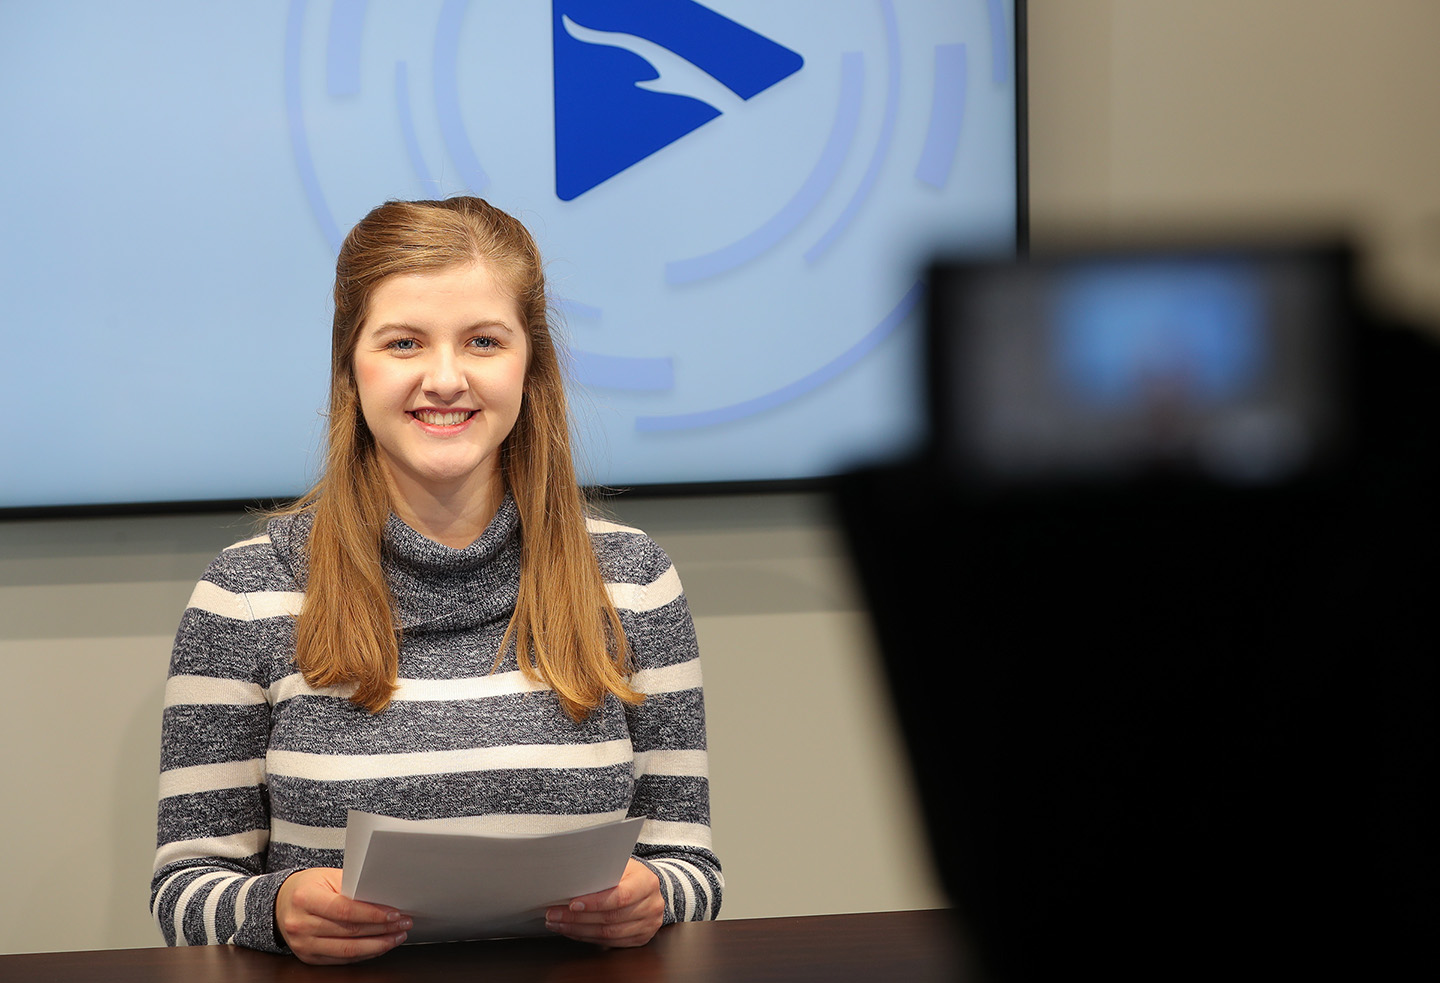 UNK junior Grace McDonald anchors the “Antelope News” show during production Thursday afternoon. (Photos by Erika Pritchard, UNK Communications)